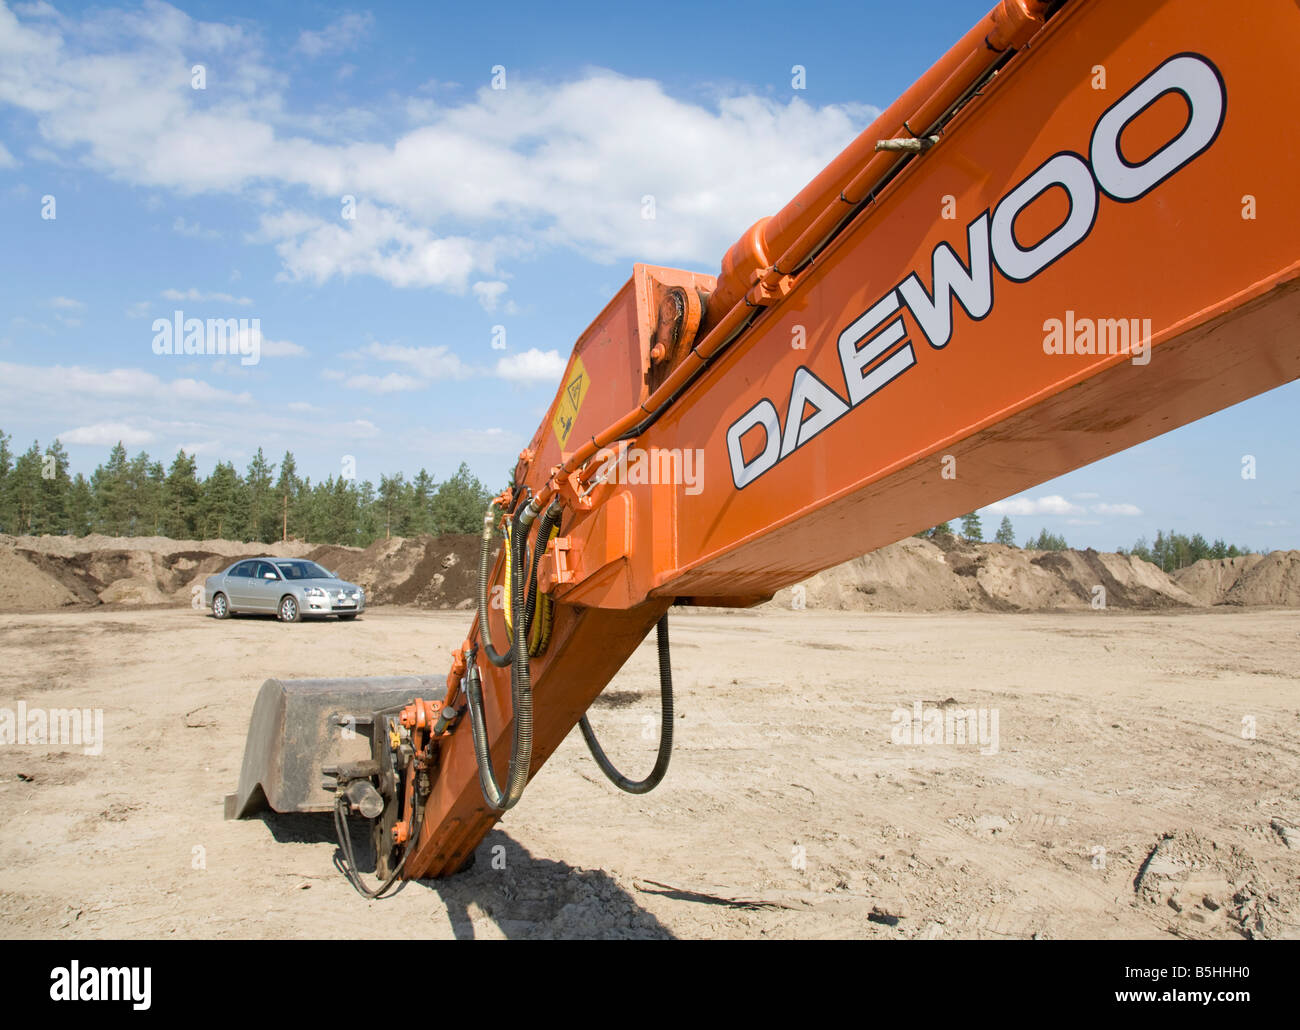 Orange Daewoo digger boom extended and Toyota Avensis car , Finland Stock Photo